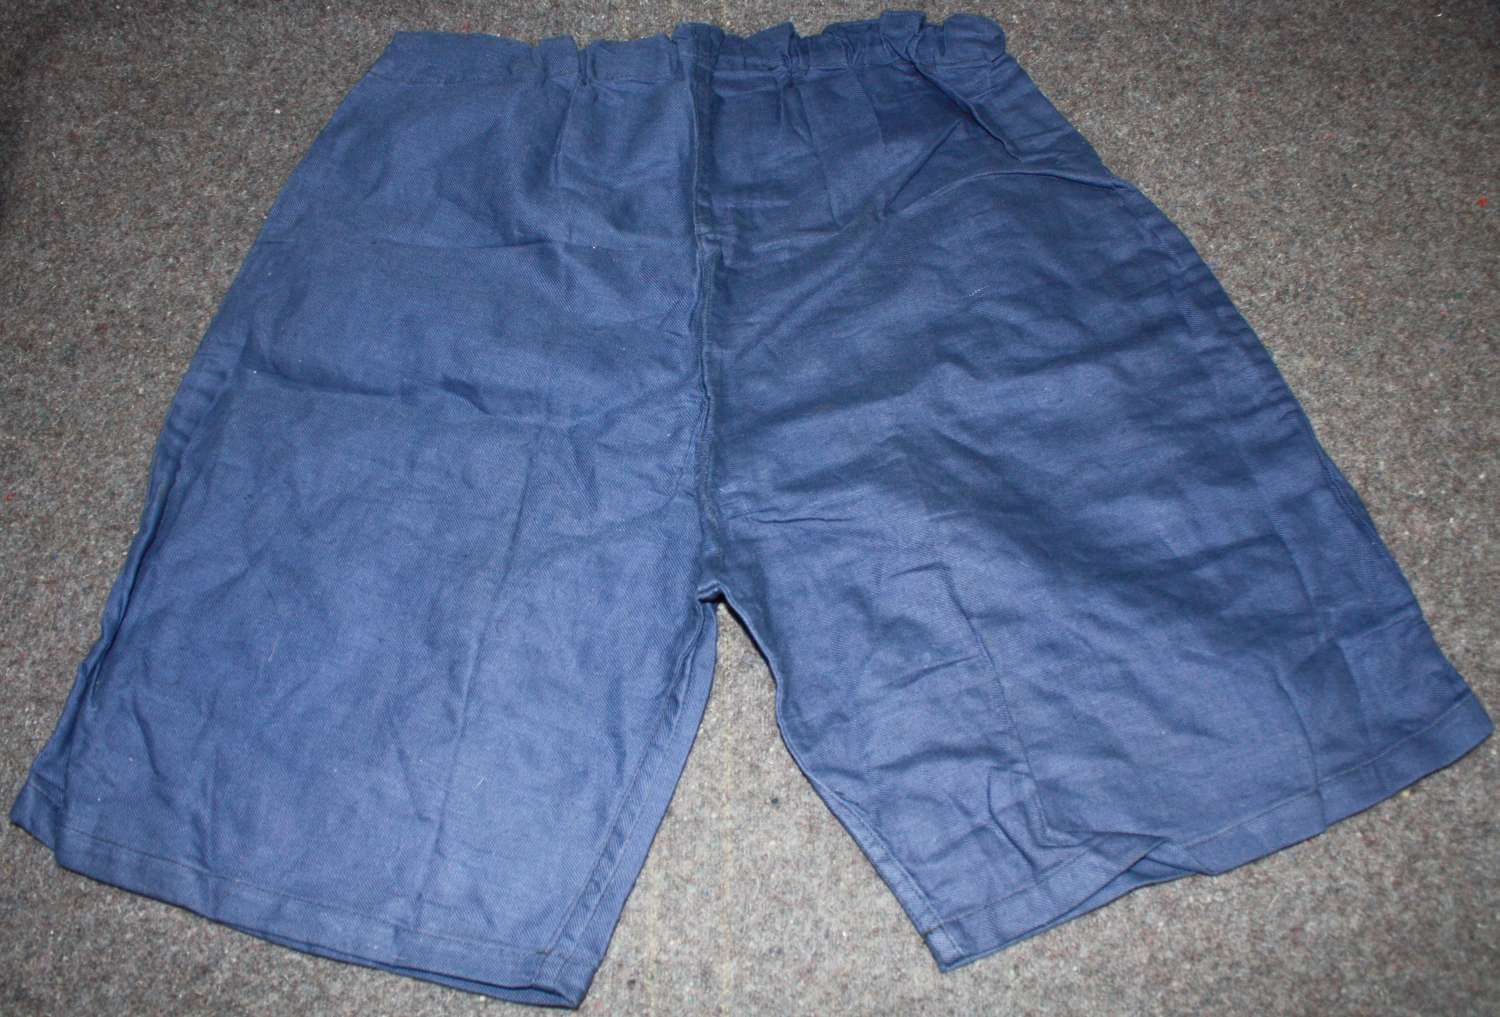 A VERY GOOD PAIR OF THE BRITISH ISSUE PT SHORTS 1940 DATED SIZE 1